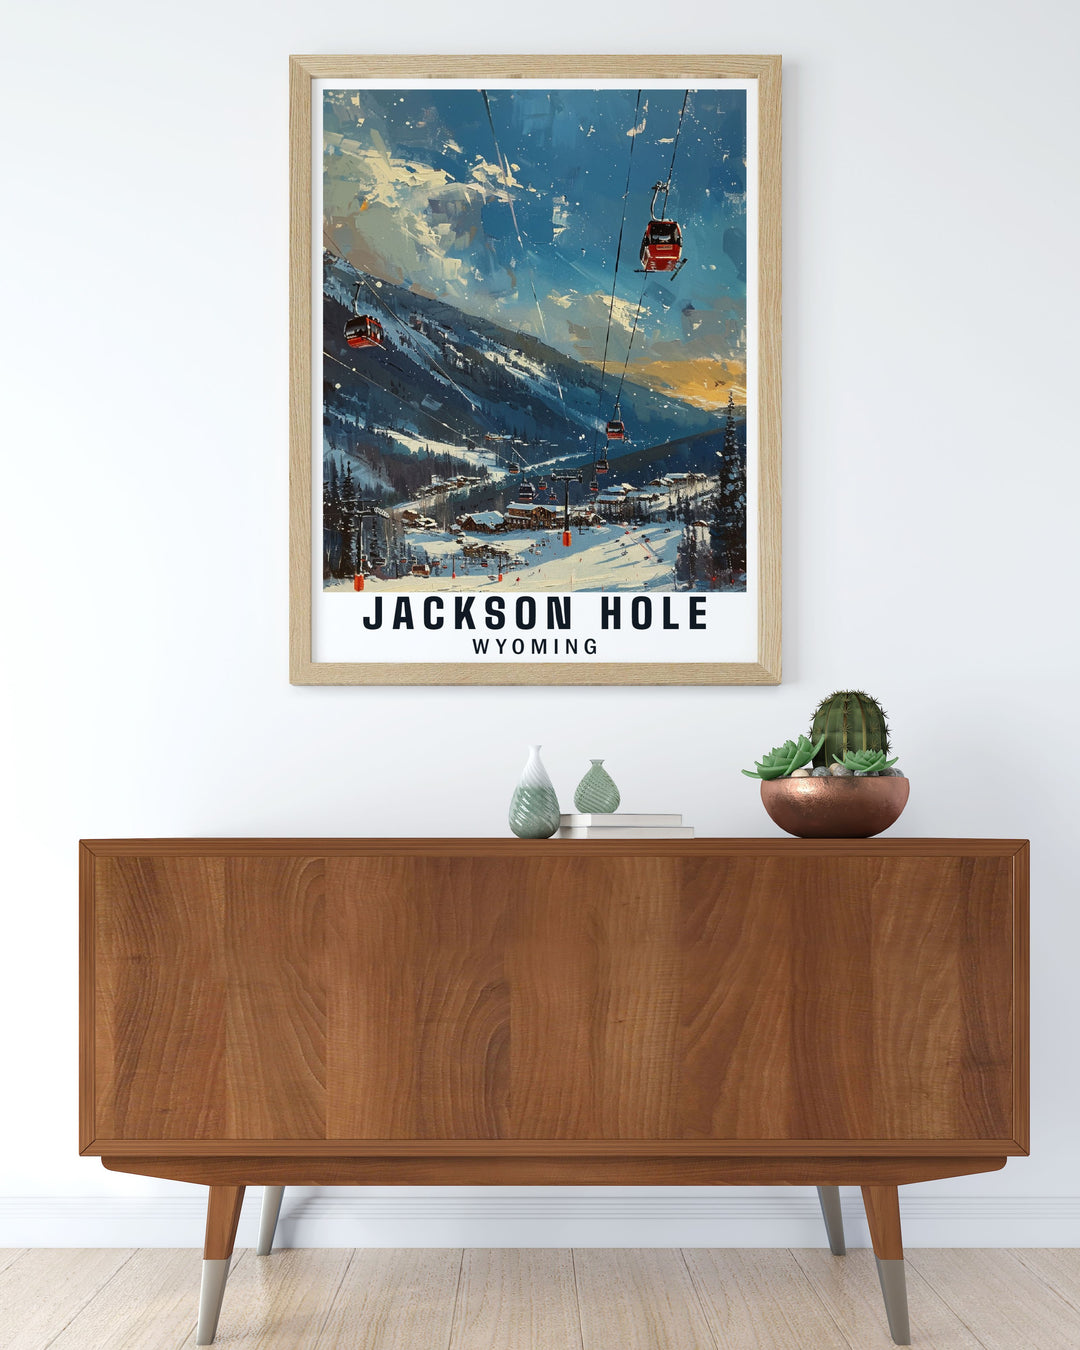 Highlighting the rugged beauty of Jackson Hole and the dynamic slopes of the Mountain Resort, this travel poster is perfect for adding a touch of Wyomings charm to your space.